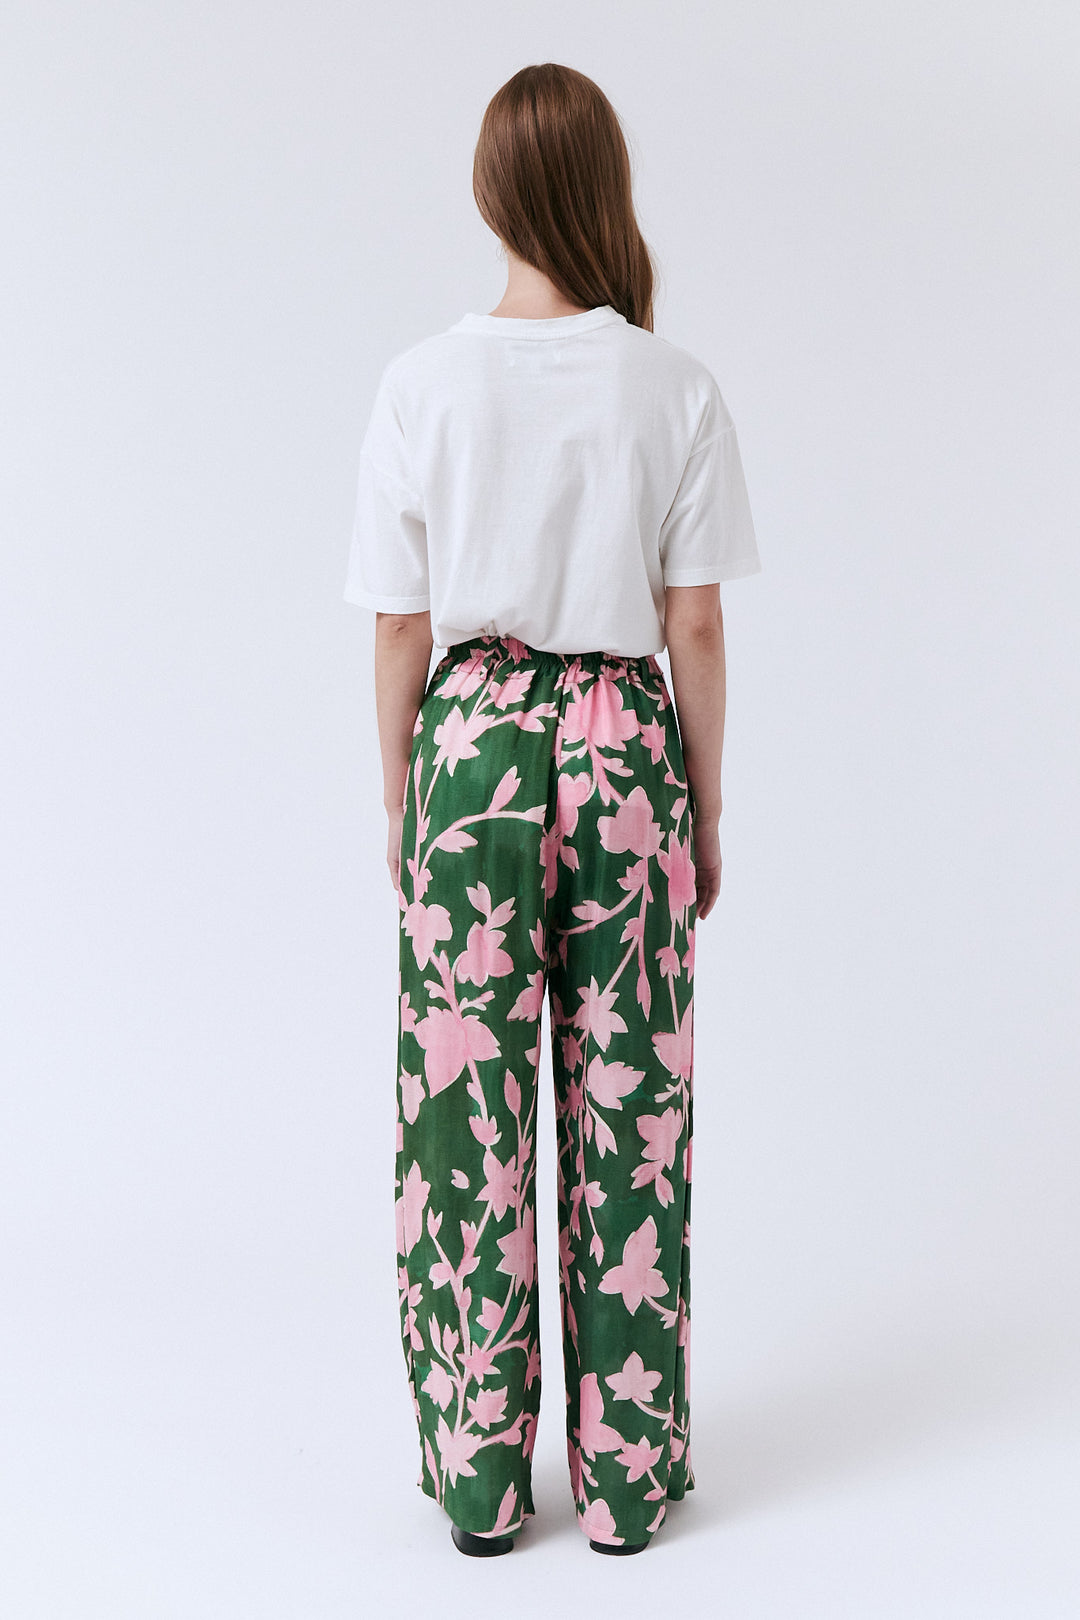 Pink & green floral print pants with elastic waistband - lightweight & perfect for Spring. 100% Ecovero Viscose - Sustainably made in Spain